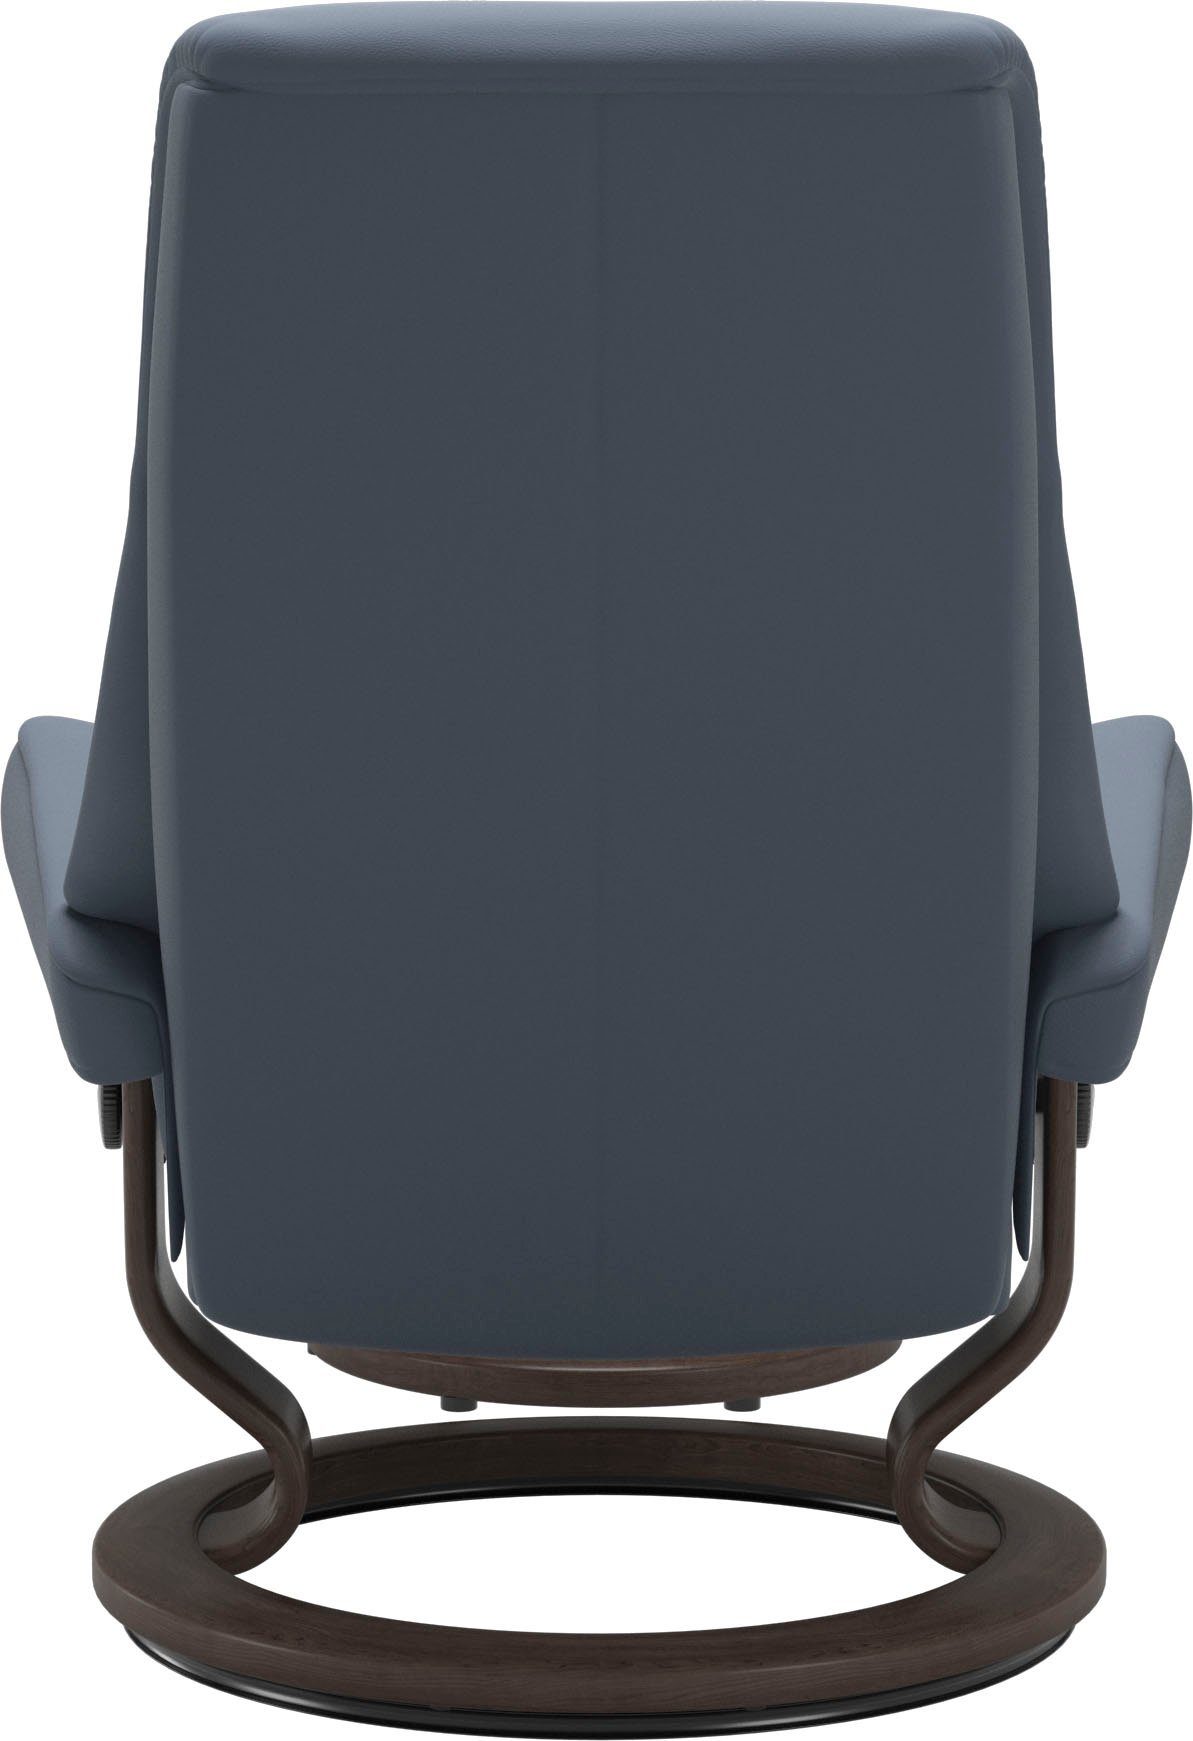 Stressless® Wenge Classic mit Größe M,Gestell Relaxsessel View, Base,